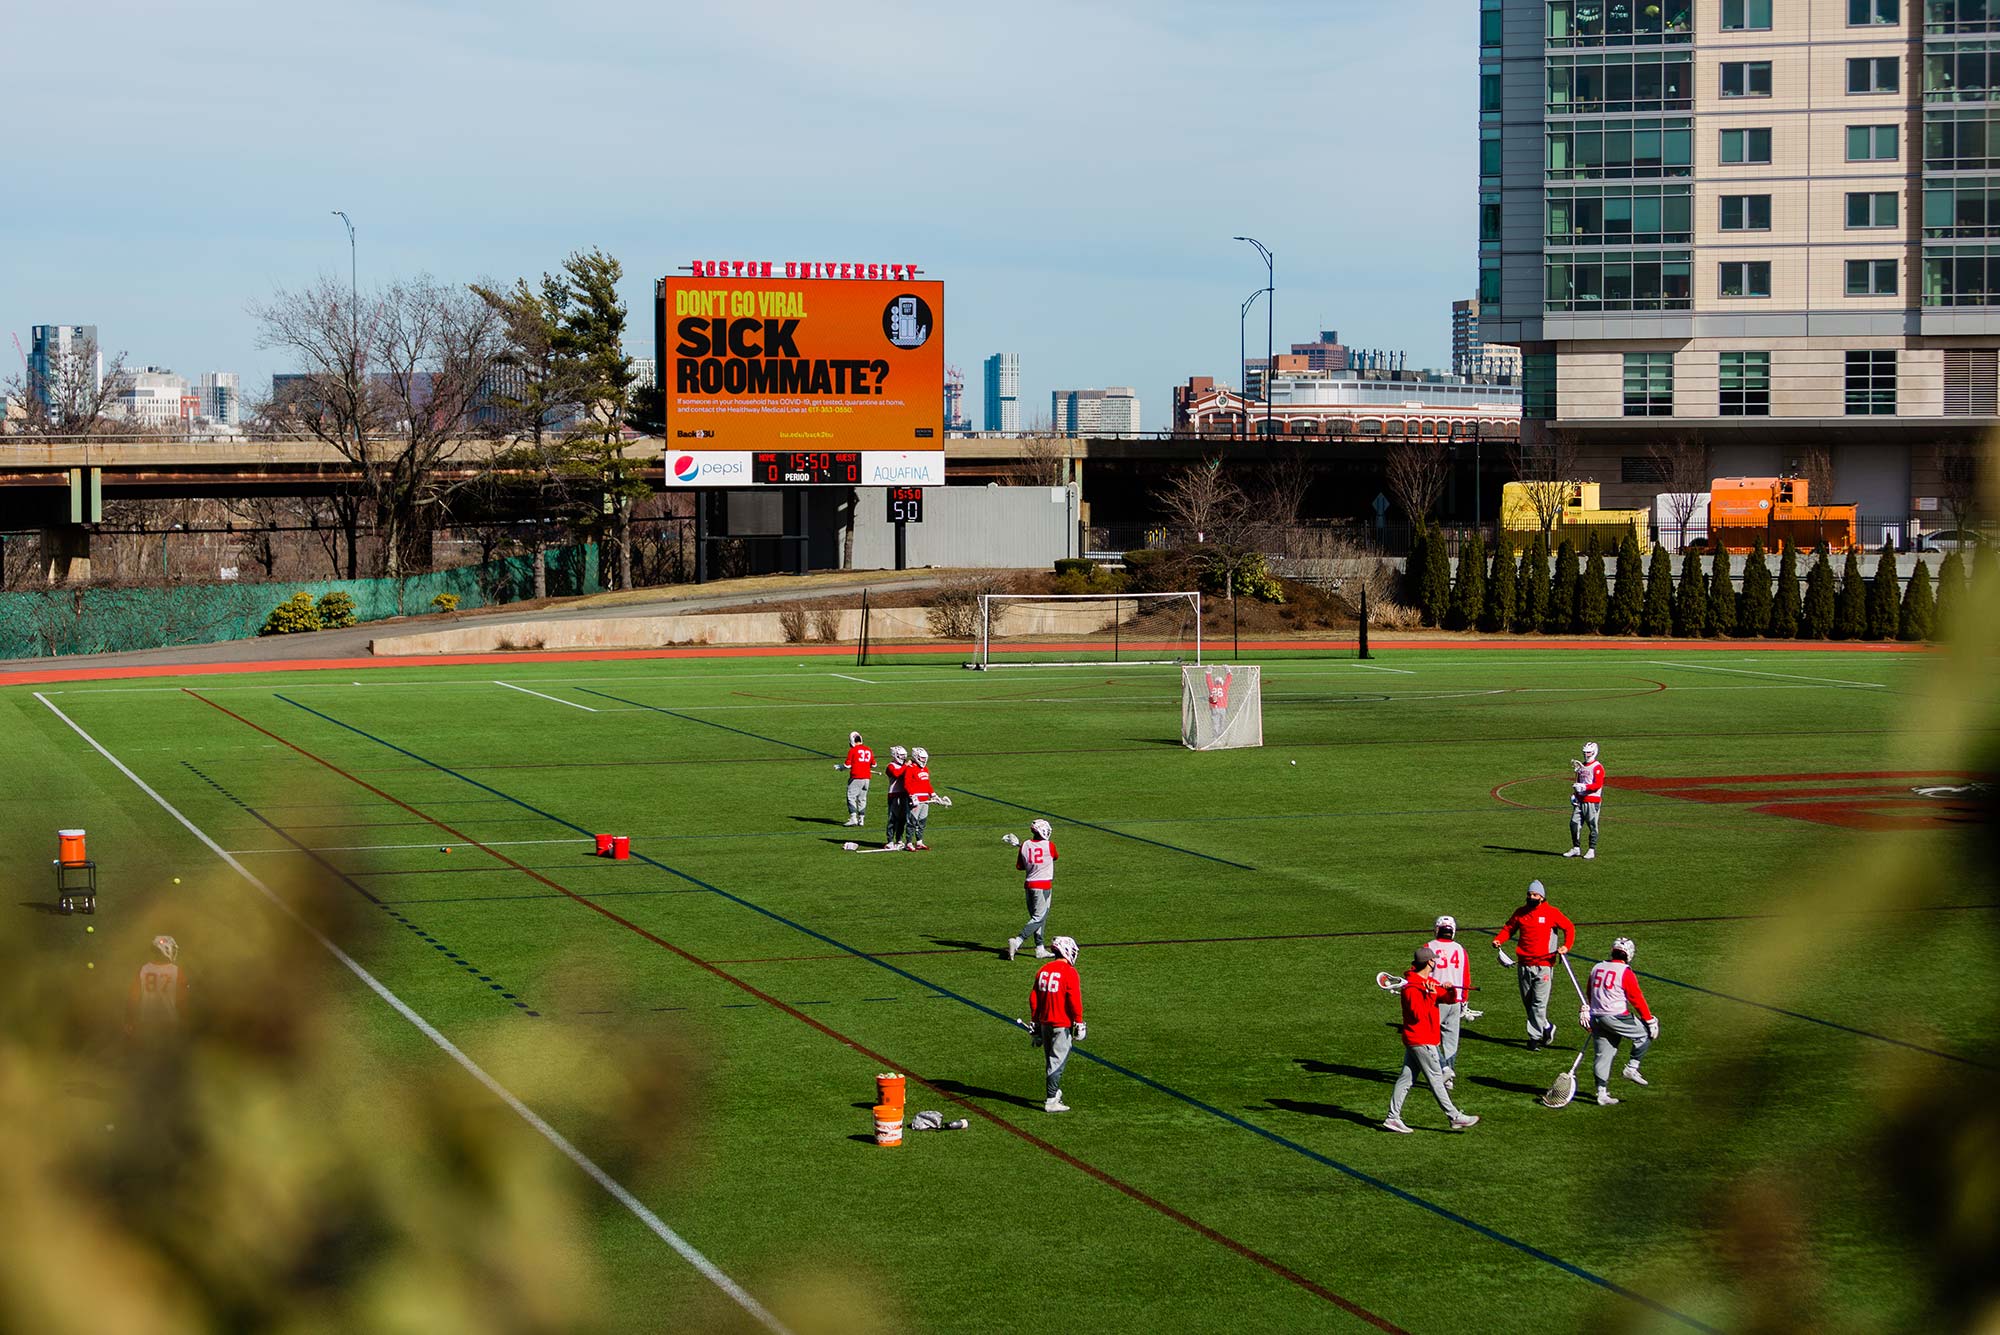 Photo of lacrosse players practicing on Nickerson Field; a large orange billboard in the background says “sick roommate?” The sky is a little cloudy and blue.